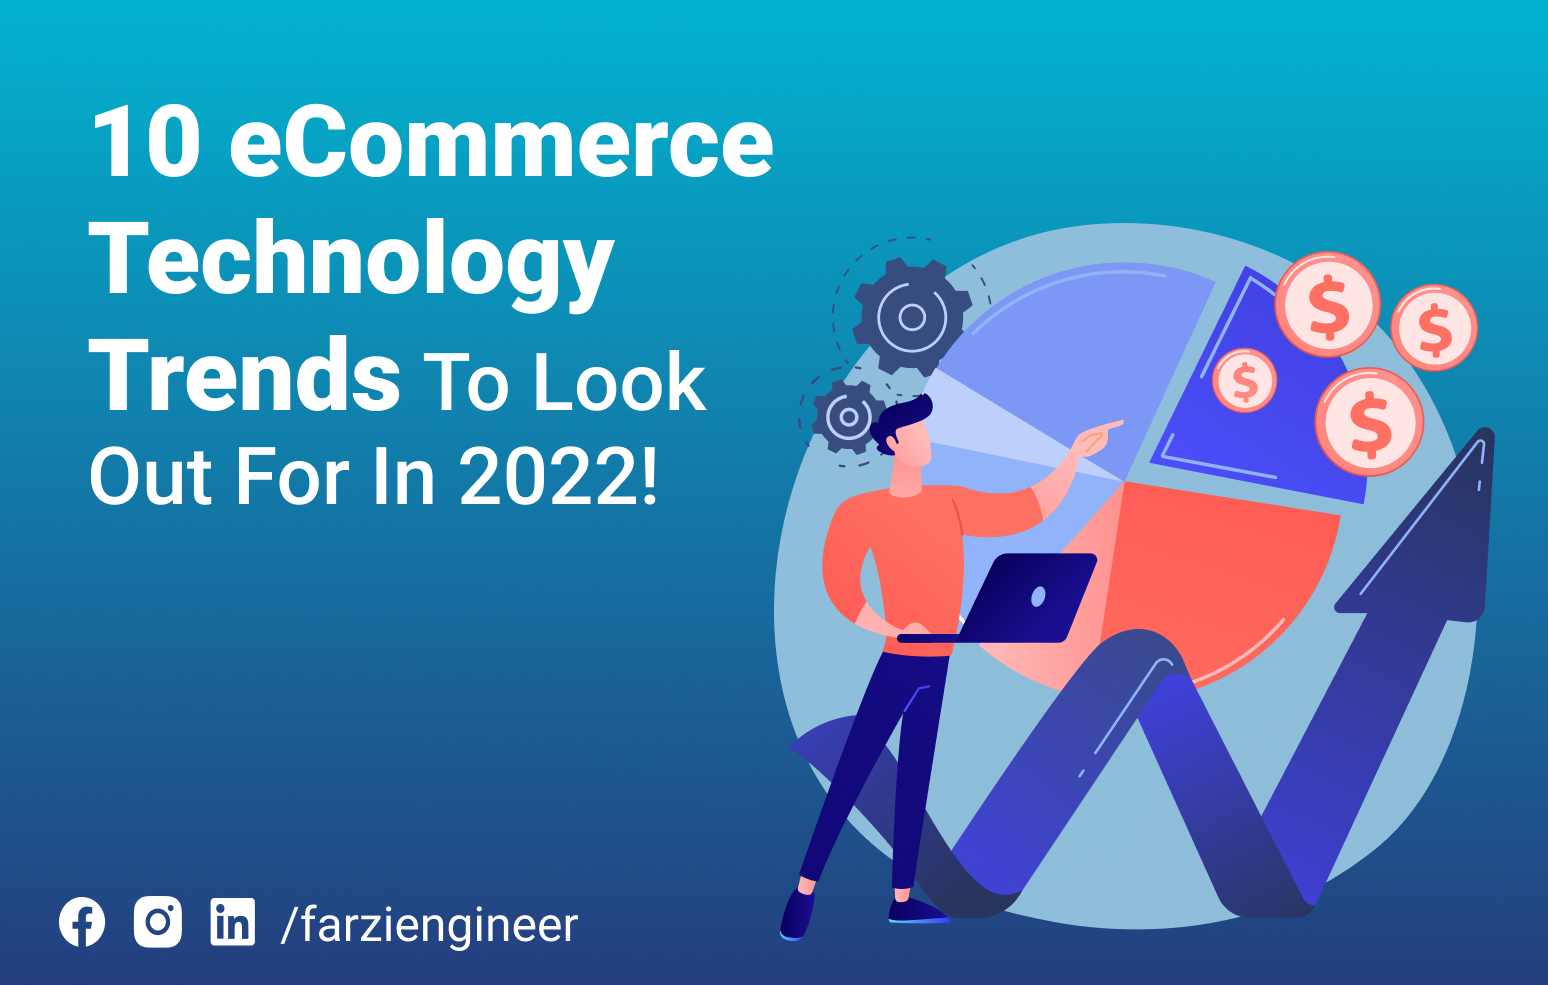 10 Ecommerce Technology Trends To Look Out For In 2022!